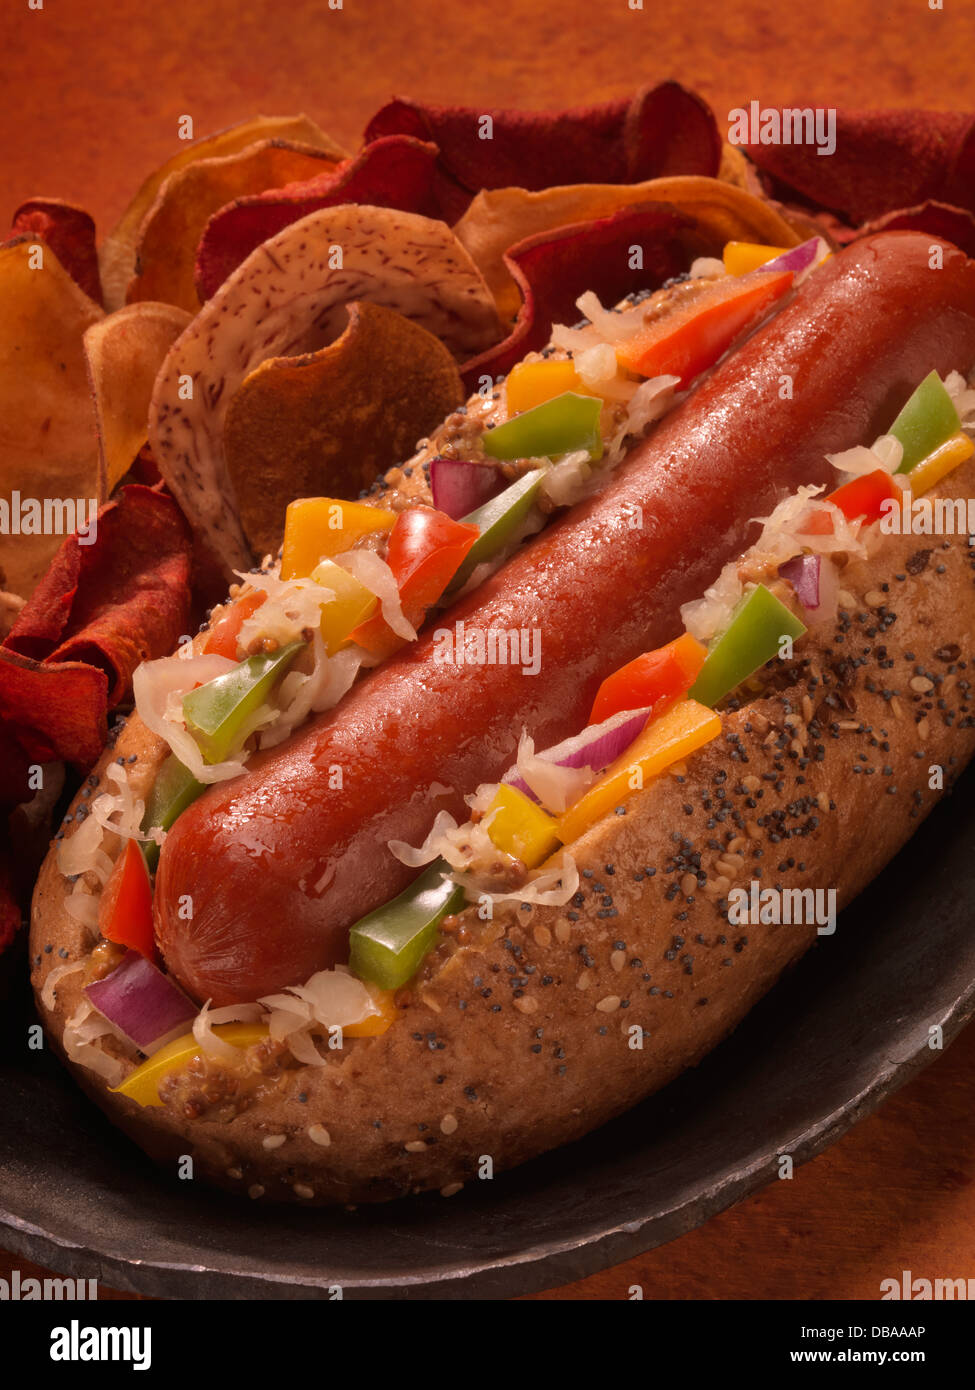 A loaded Chicago style hot dog with deli chips. Stock Photo